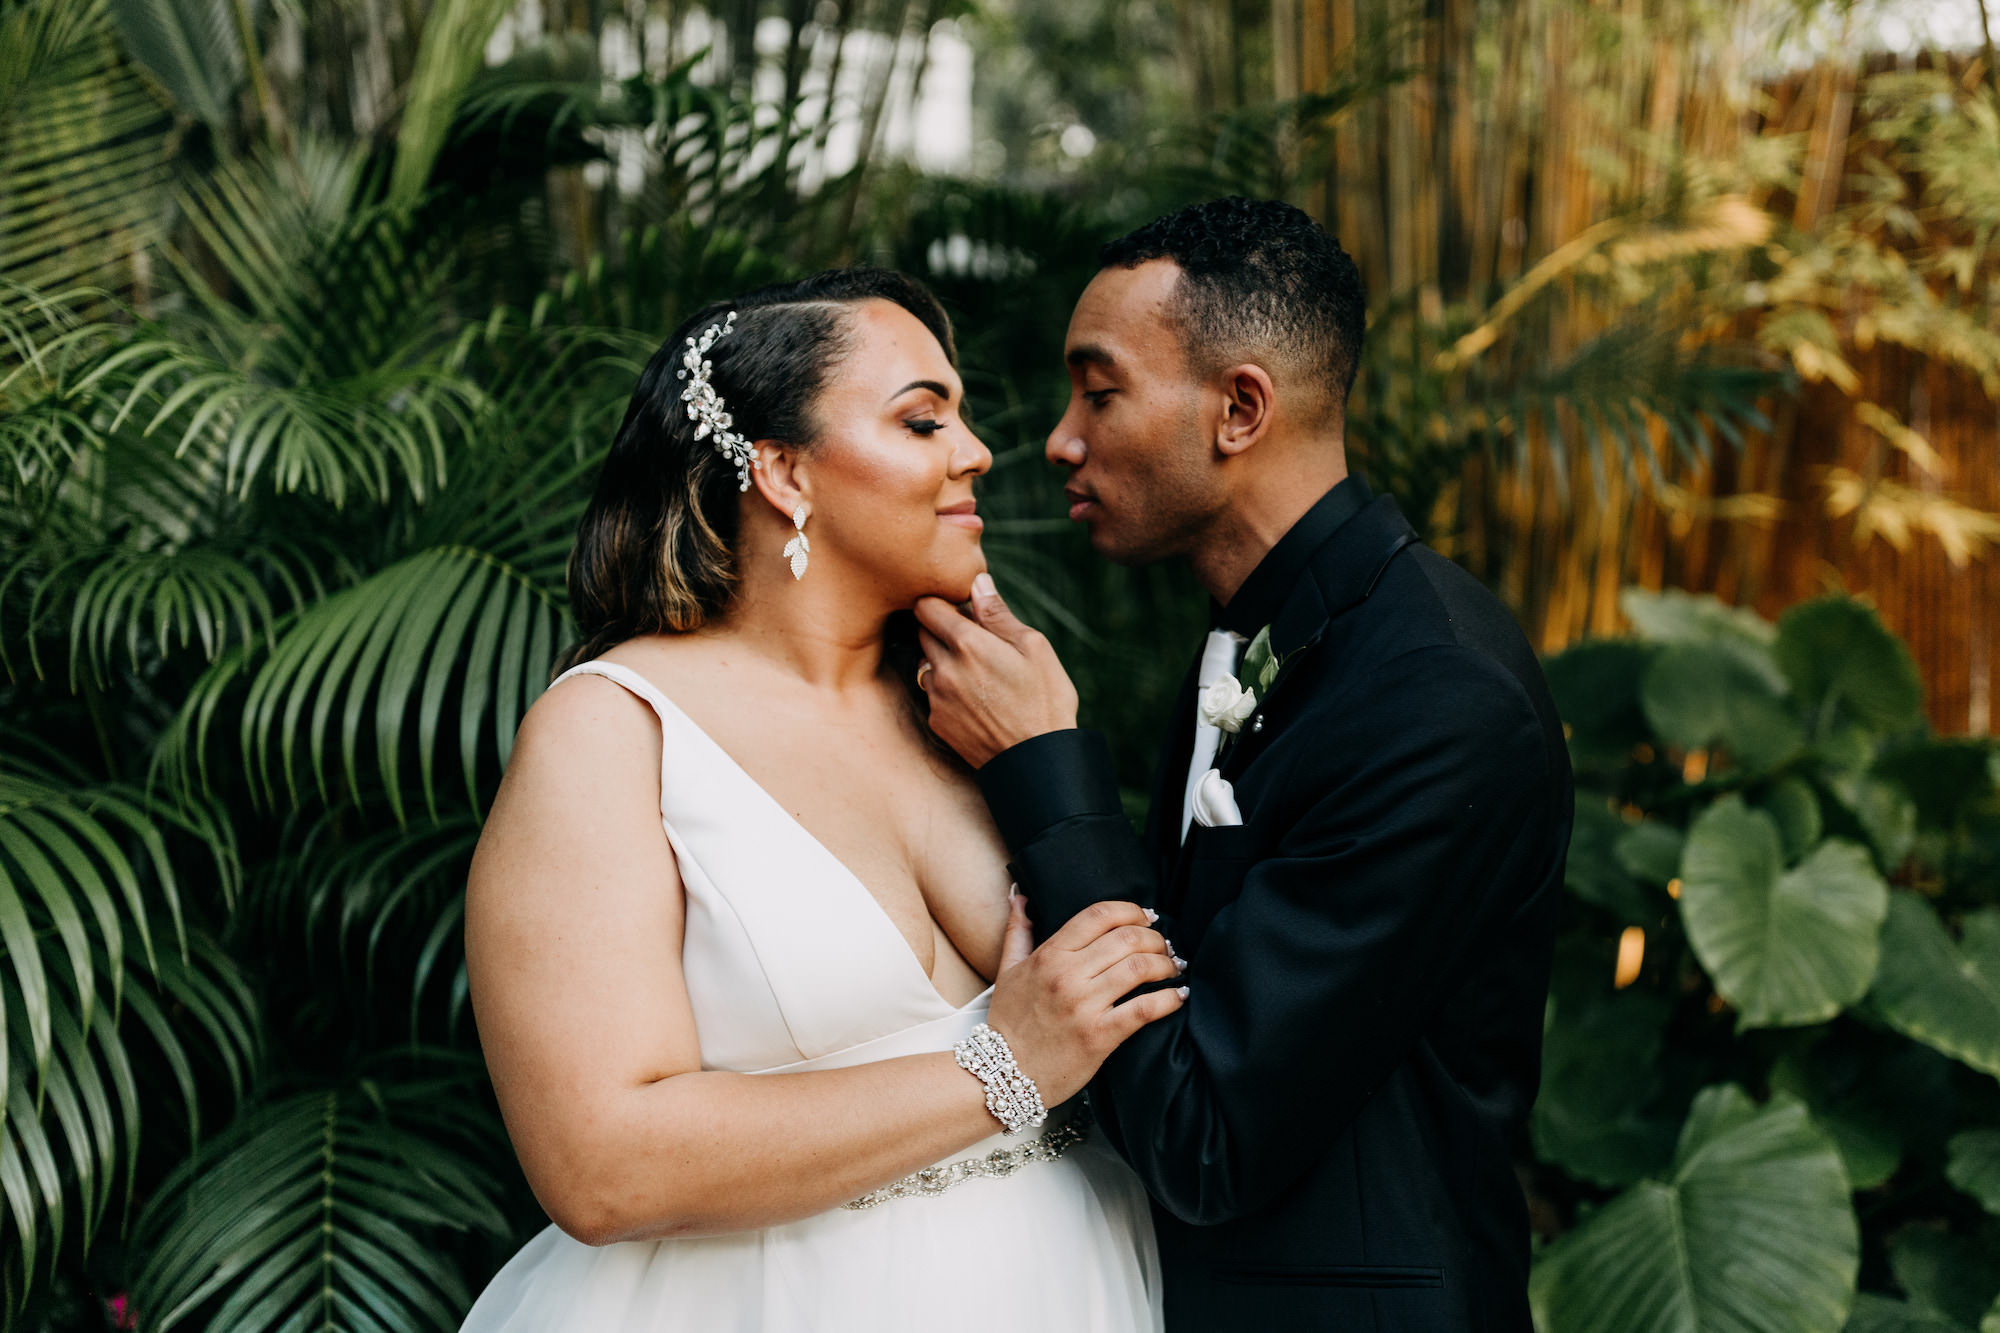 Classic Simple Bride and Groom Wedding Outdoor Bamboo Courtyard Unique Downtown Tampa Wedding Venue NOVA 535 | Wedding Photographer Amber McWhorter Photography